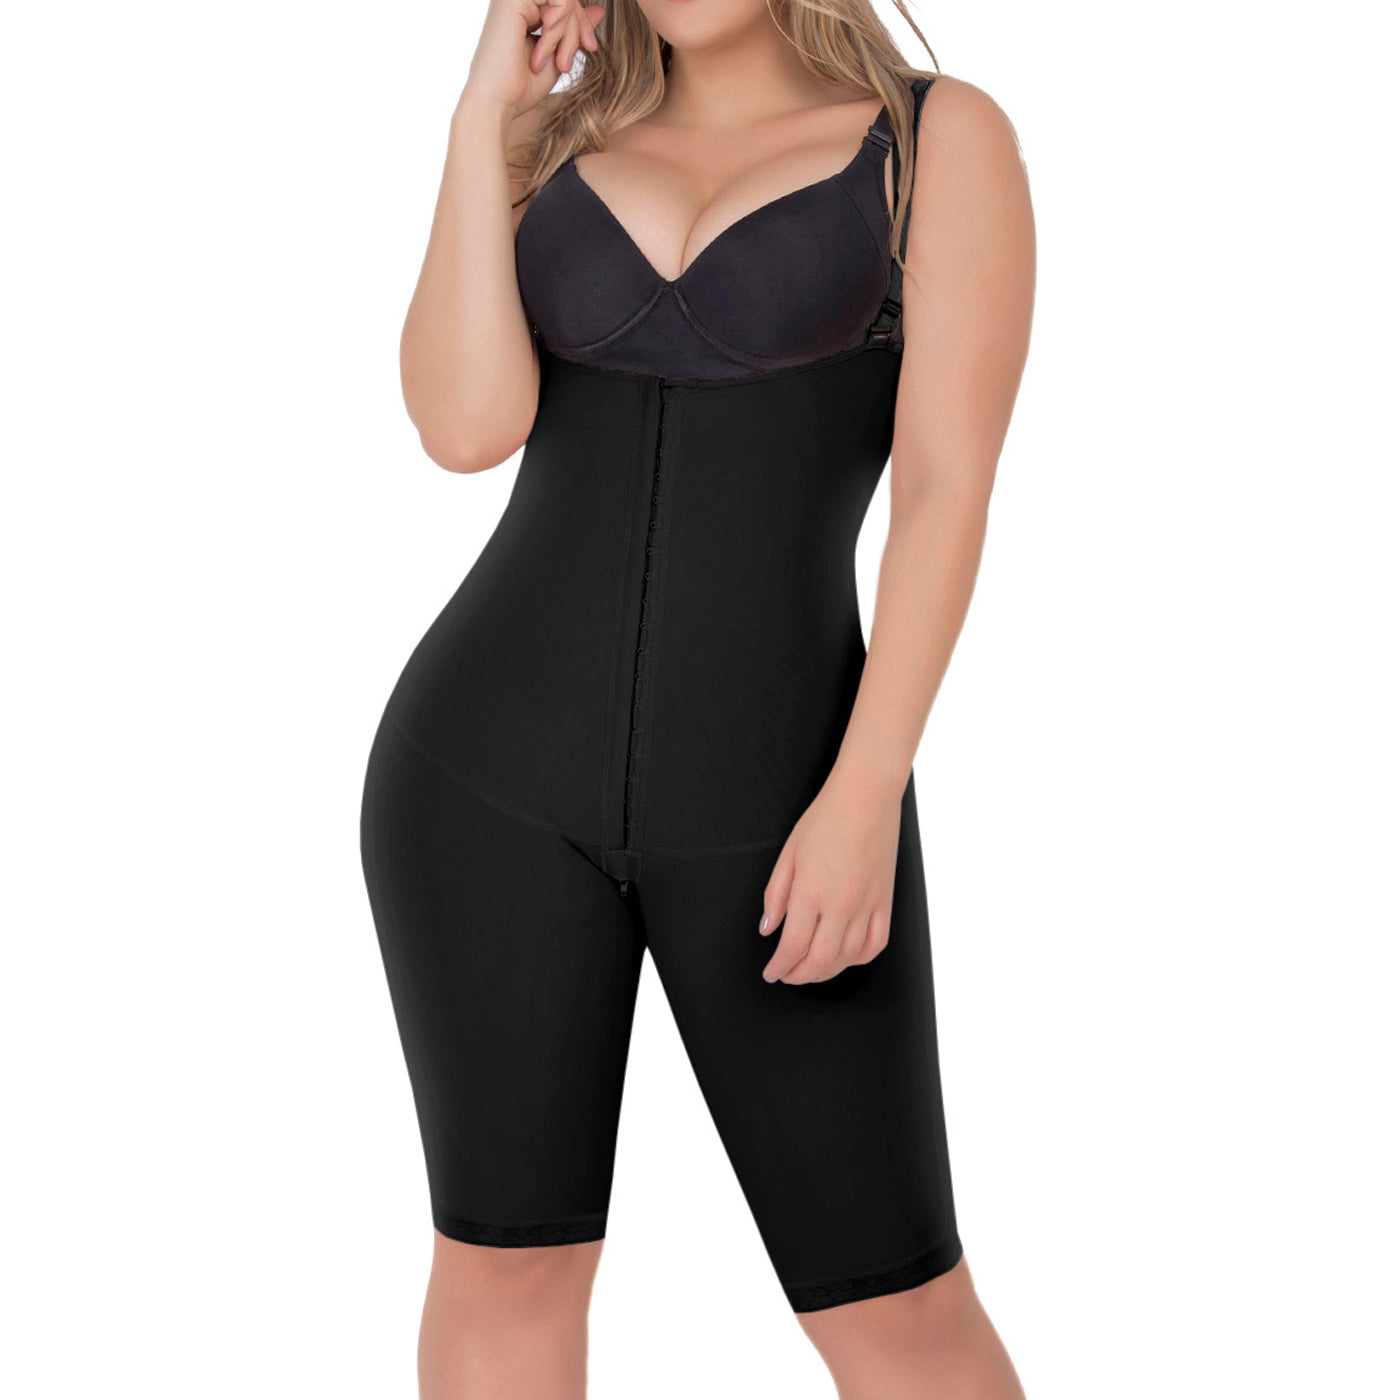 UpLady 6172 | Fajas Colombianas | High Compression Bodysuit with Posture Corrector